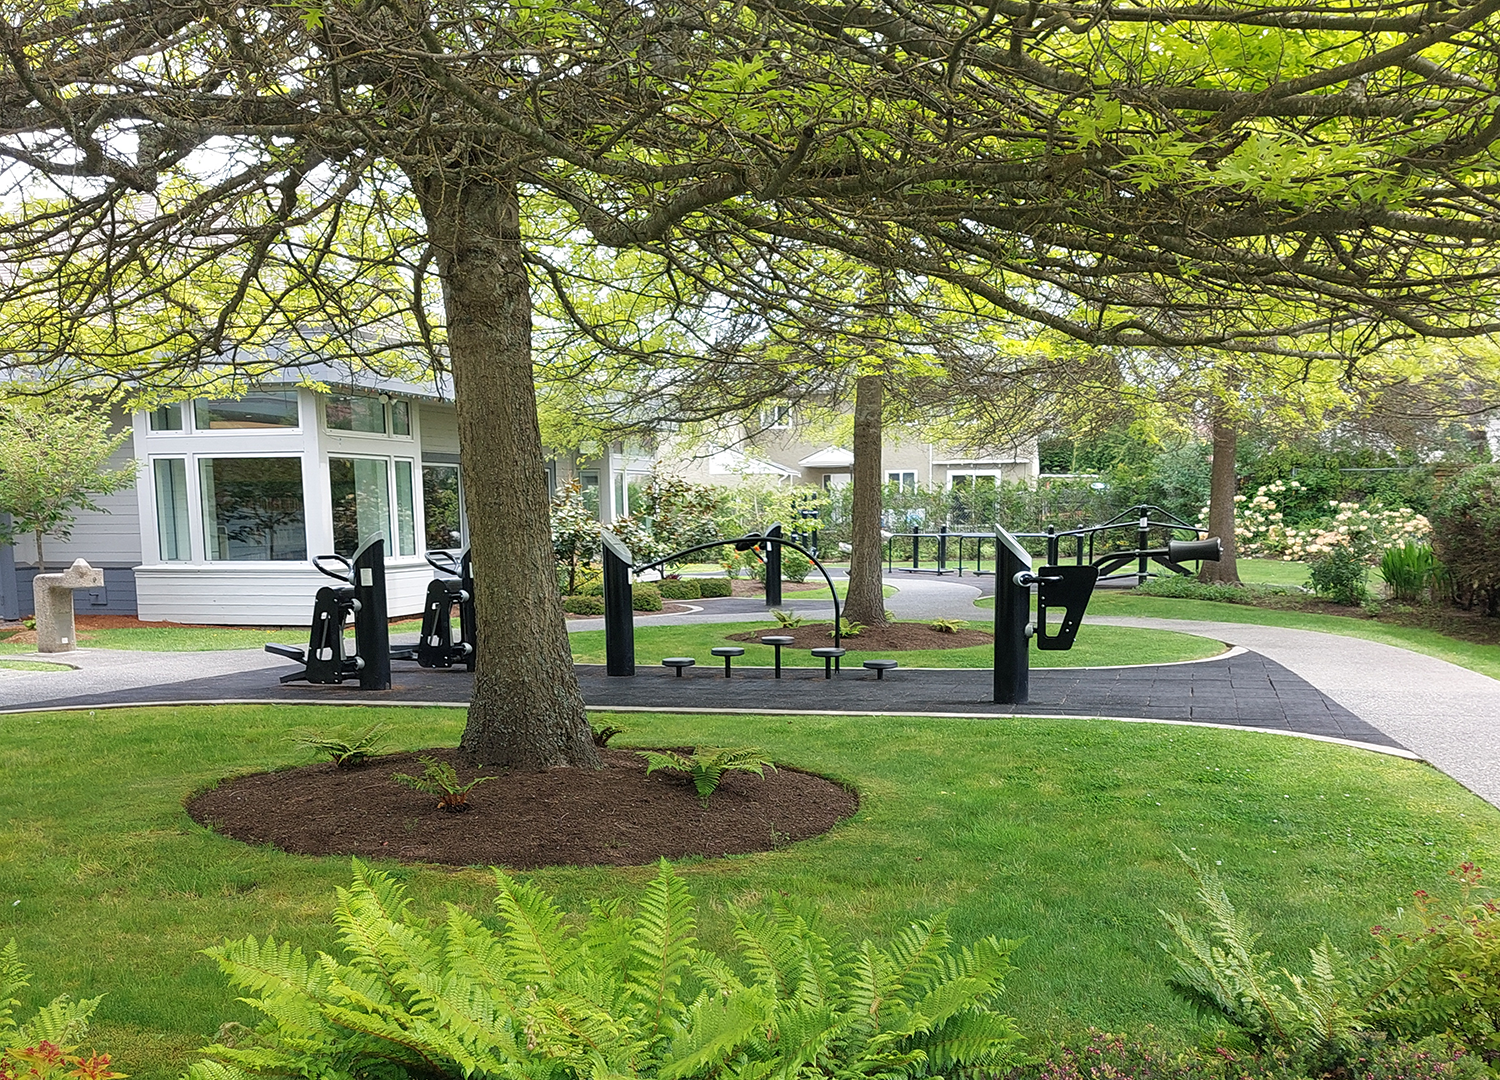 Image of the Community Wellness Park with ferns and a leaf tree in the foreground and outdoor exercise equipment, a water fountain, and the library building in the background